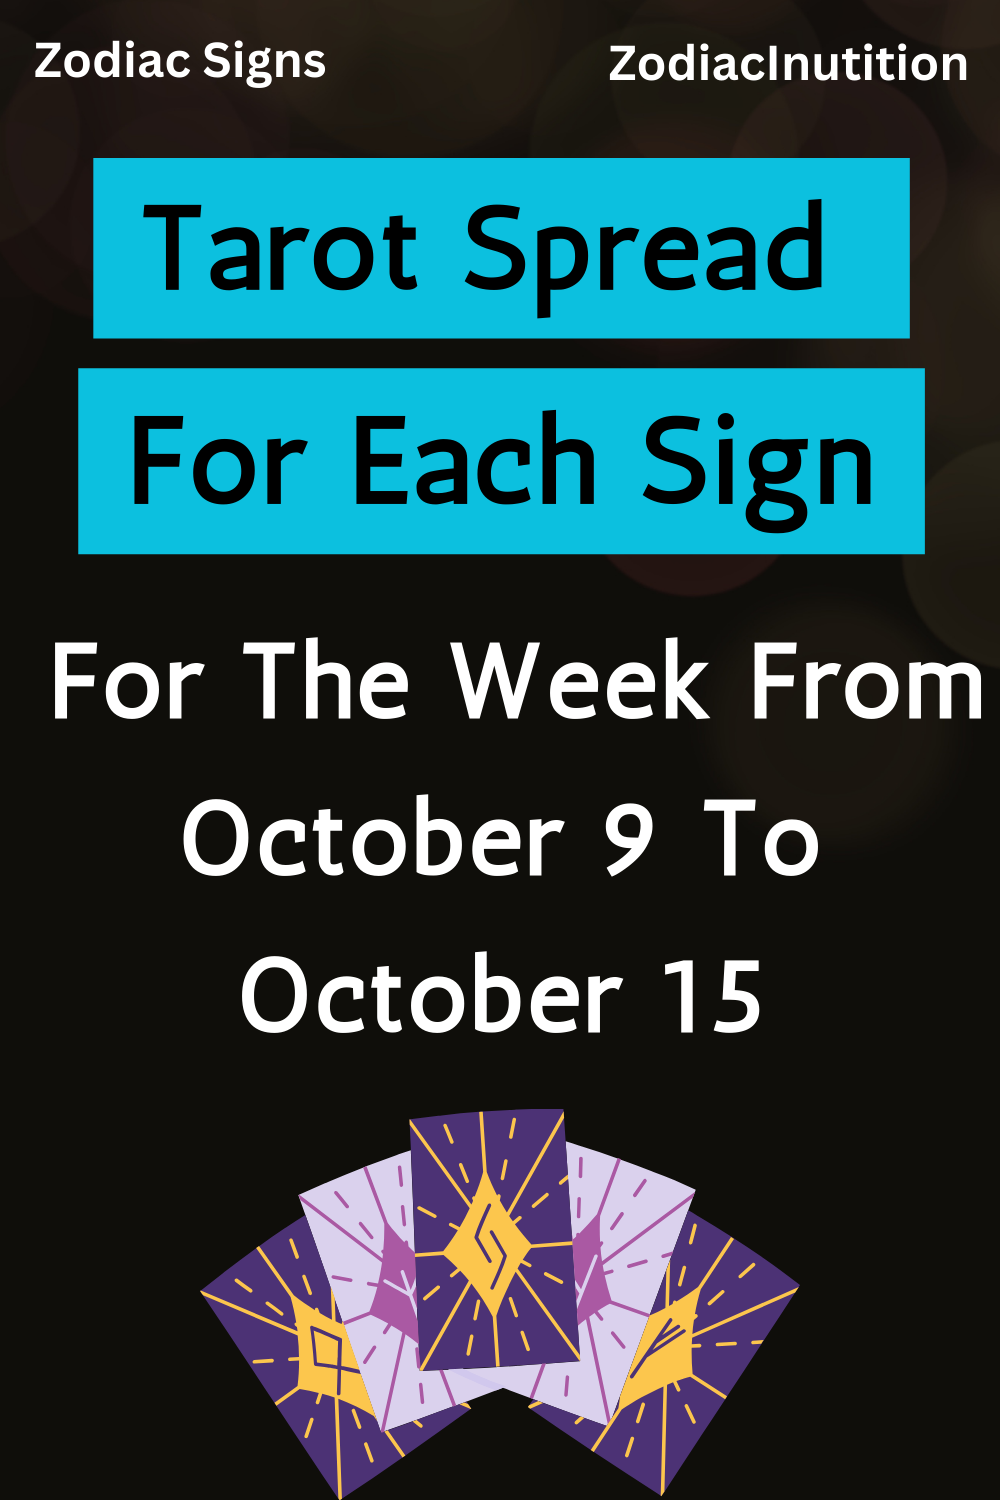 Tarot Spread For Each Sign For The Week From October 9 To October 15